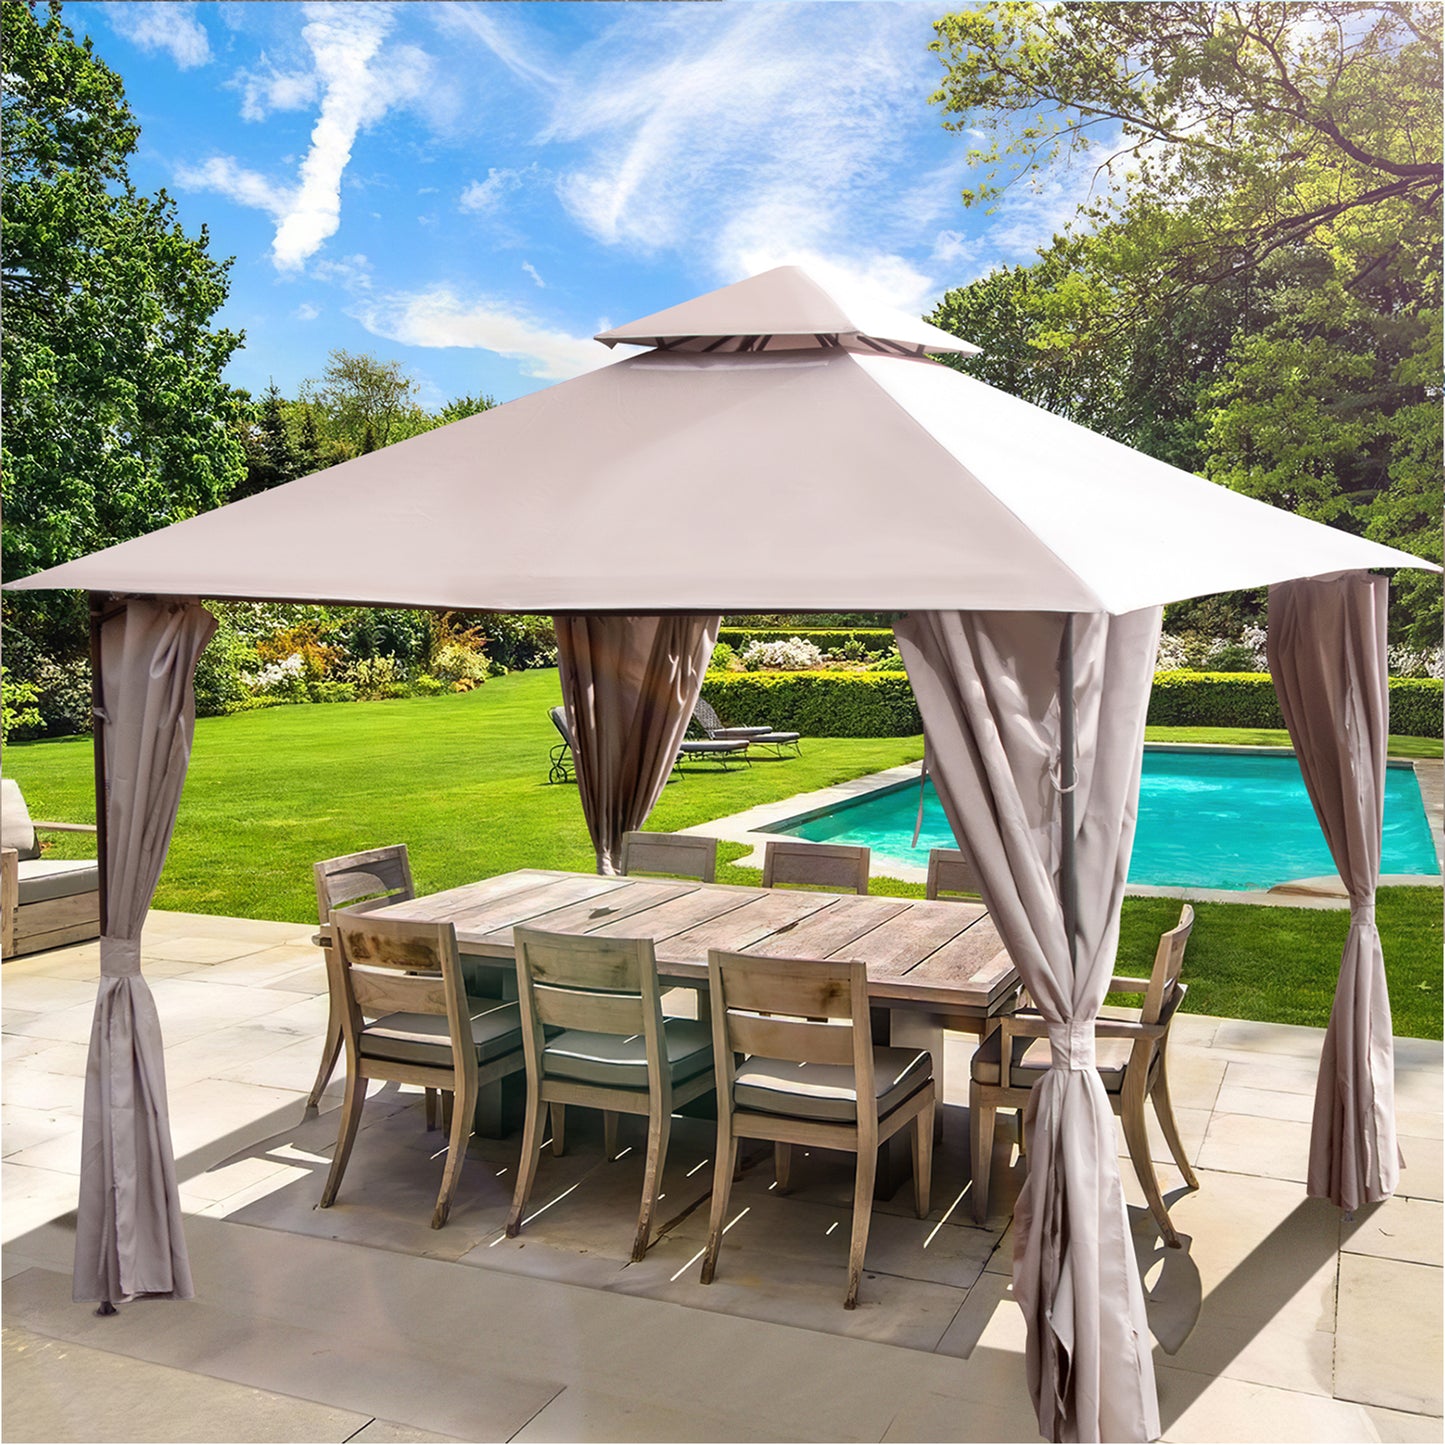 SYNGAR 10 x 10 ft Patio Gazebo, Outdoor Tent with Double Vented Roof and Mosquito Netting, Backyard Relaxing Gazebo Canopy for Shade and Rain, Perfect for Poolside, Deck, Garden, Khaki, Y023